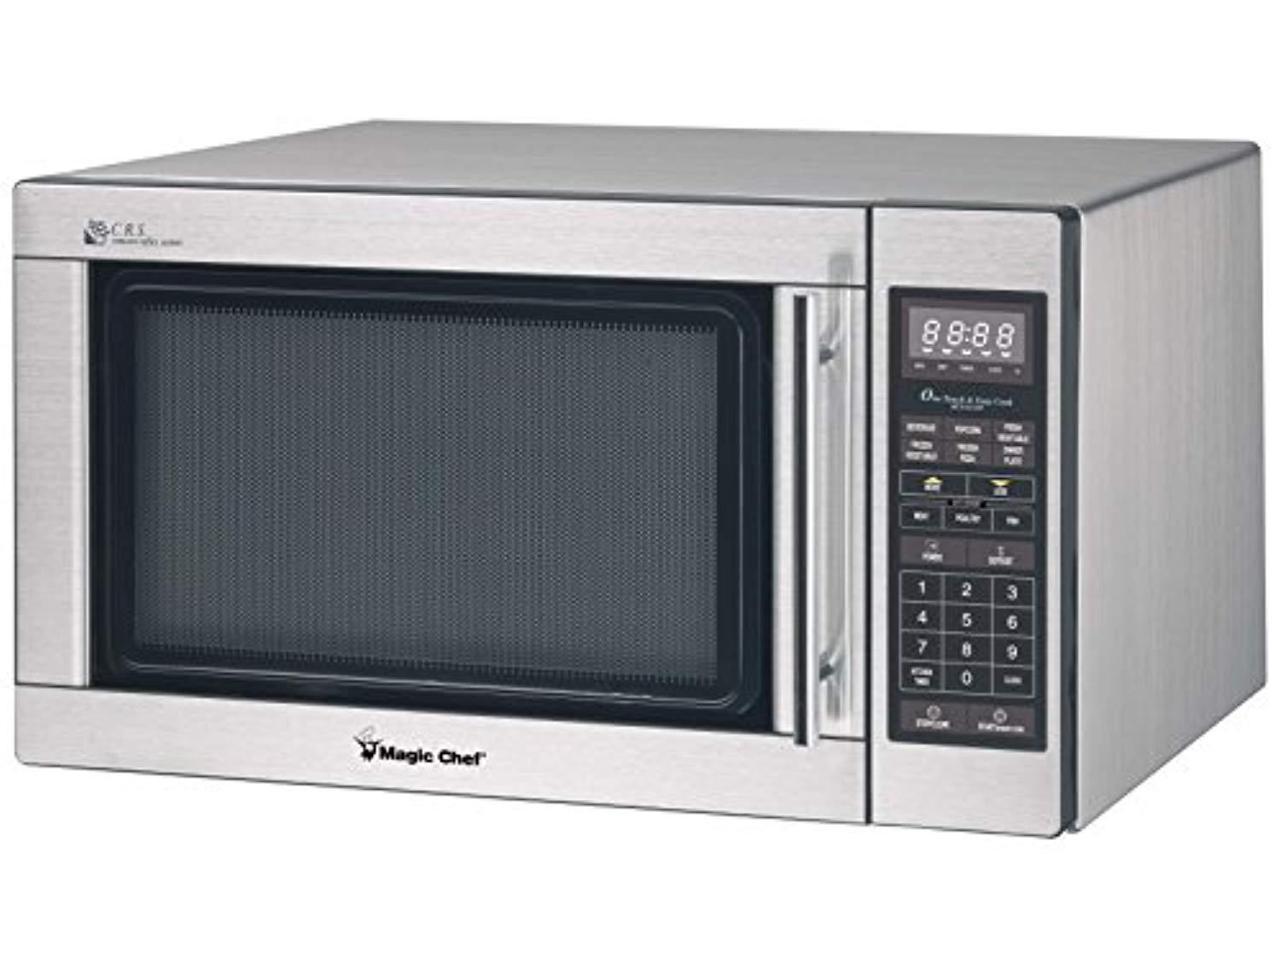 Magic Chef MCD1611ST 1.6 Cu. Ft. Microwave Oven - Stainless Steel - Newegg.com